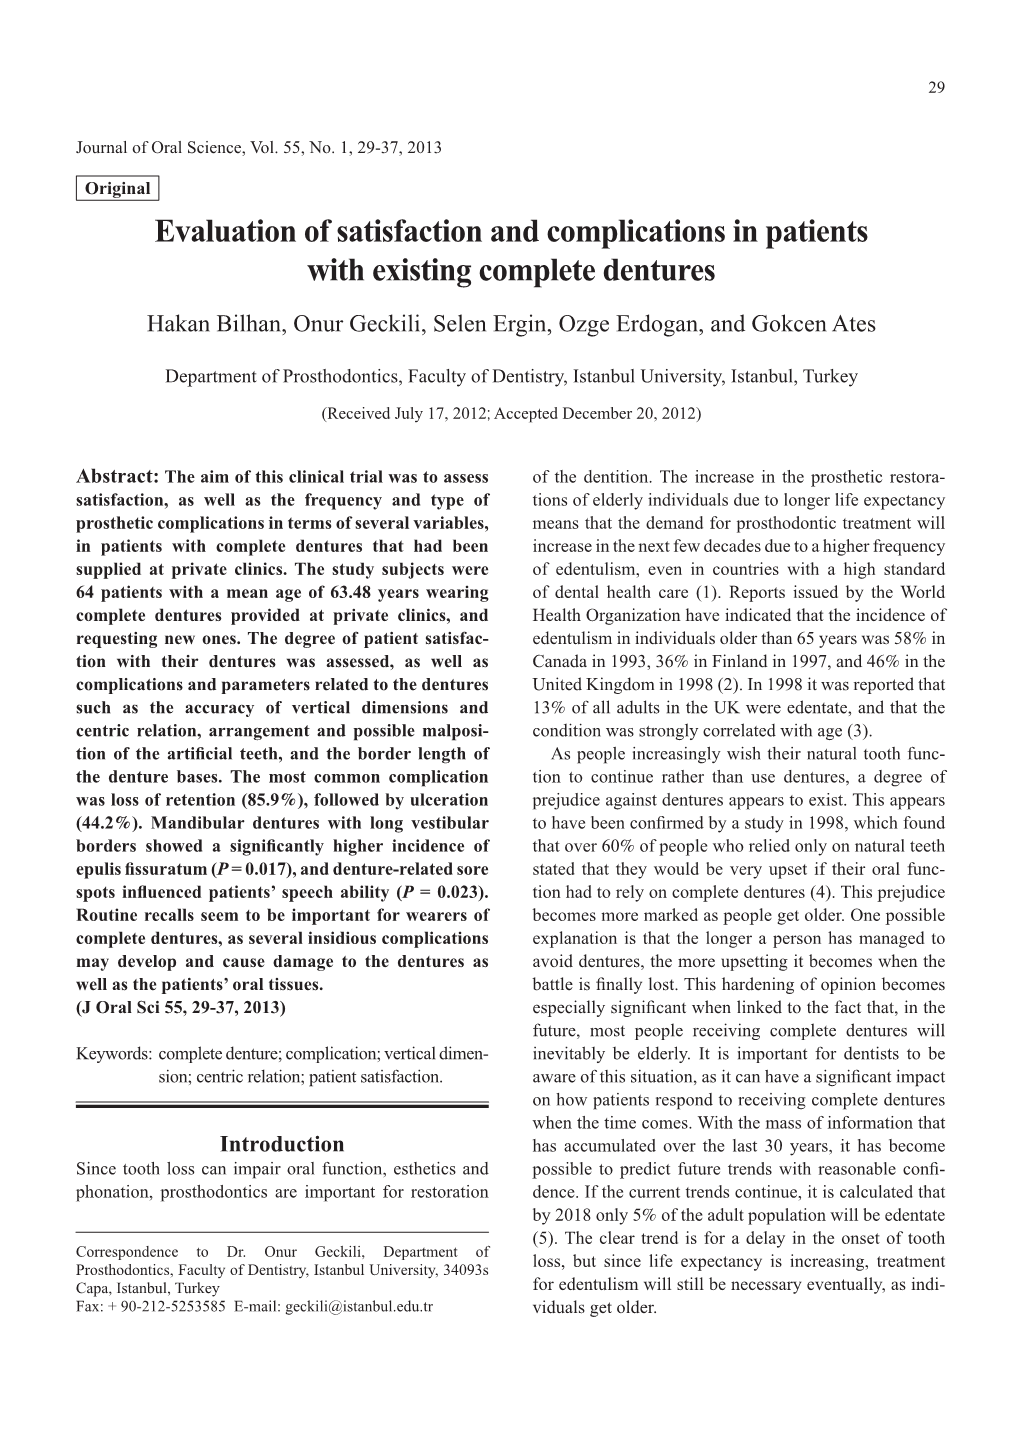 Evaluation of Satisfaction and Complications in Patients with Existing Complete Dentures Hakan Bilhan, Onur Geckili, Selen Ergin, Ozge Erdogan, and Gokcen Ates